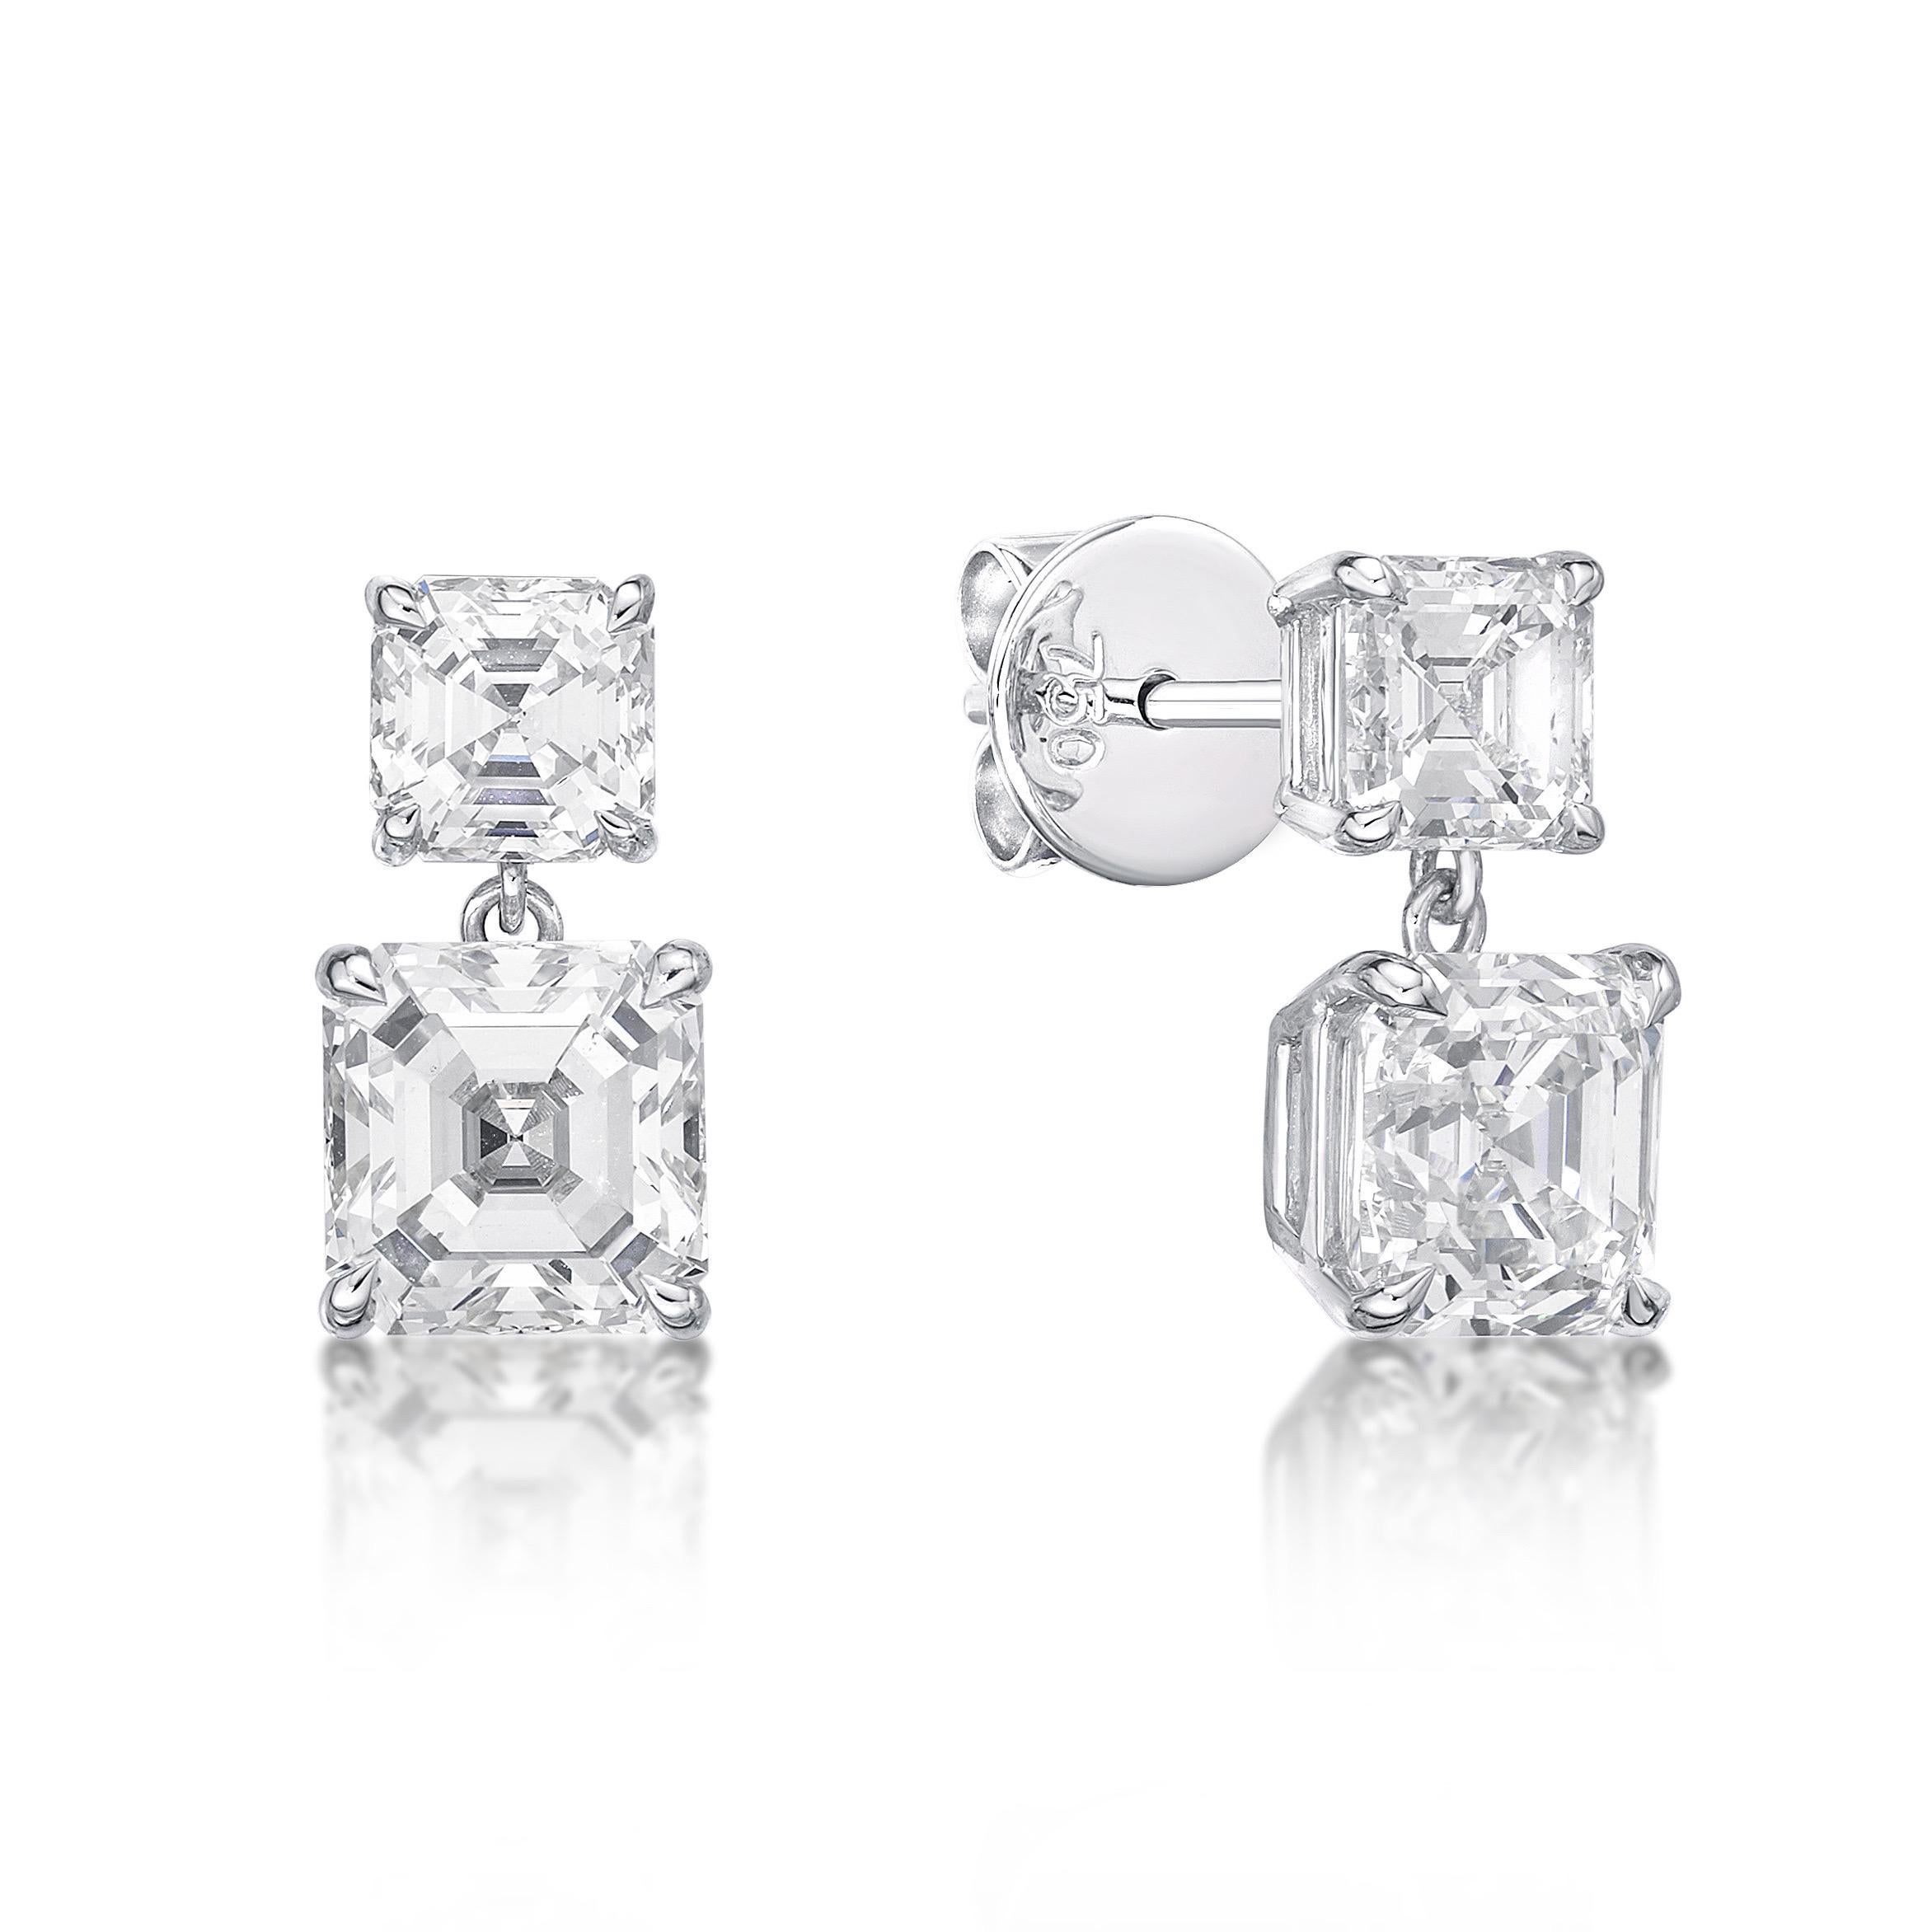 4 diamond Gia certified natural Asscher cut diamonds 
totaling 5.68ct
i-vs1, k-vs1, i-vs1, k-vs2

From The Museum Vault at Emilio Jewelry Located on New York's iconic Fifth Avenue,
Showcasing a very special and rare Gia certified natural pink